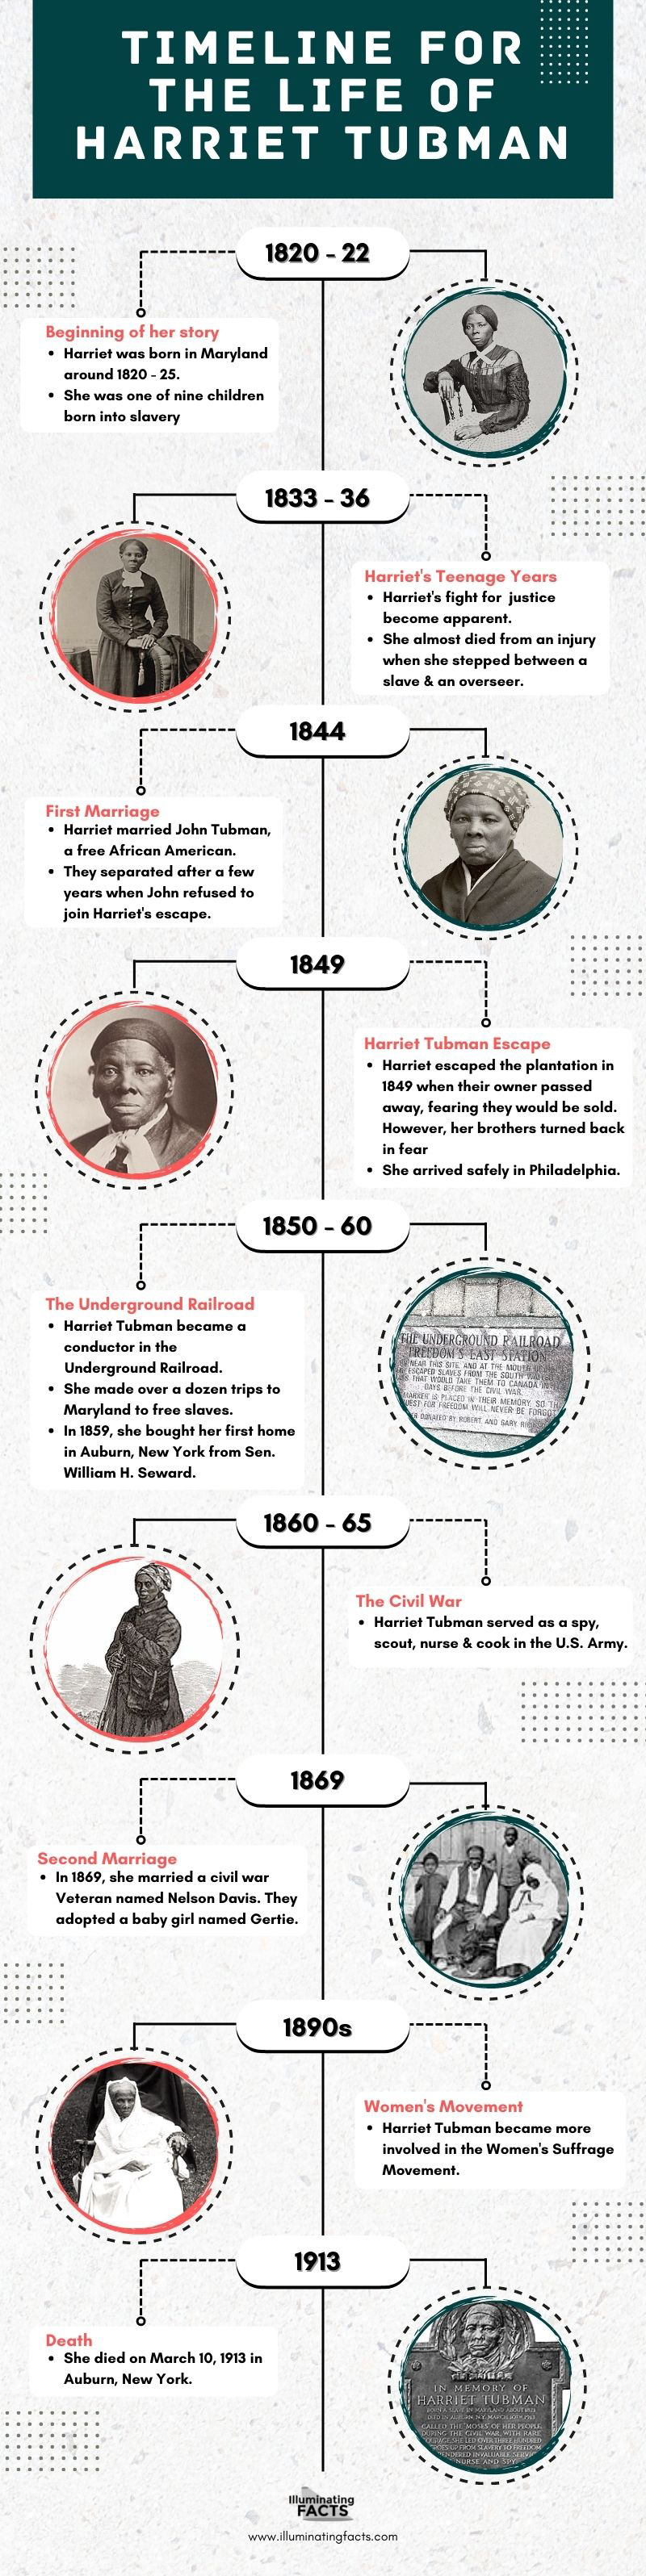 Timeline for the Life of Harriet Tubman